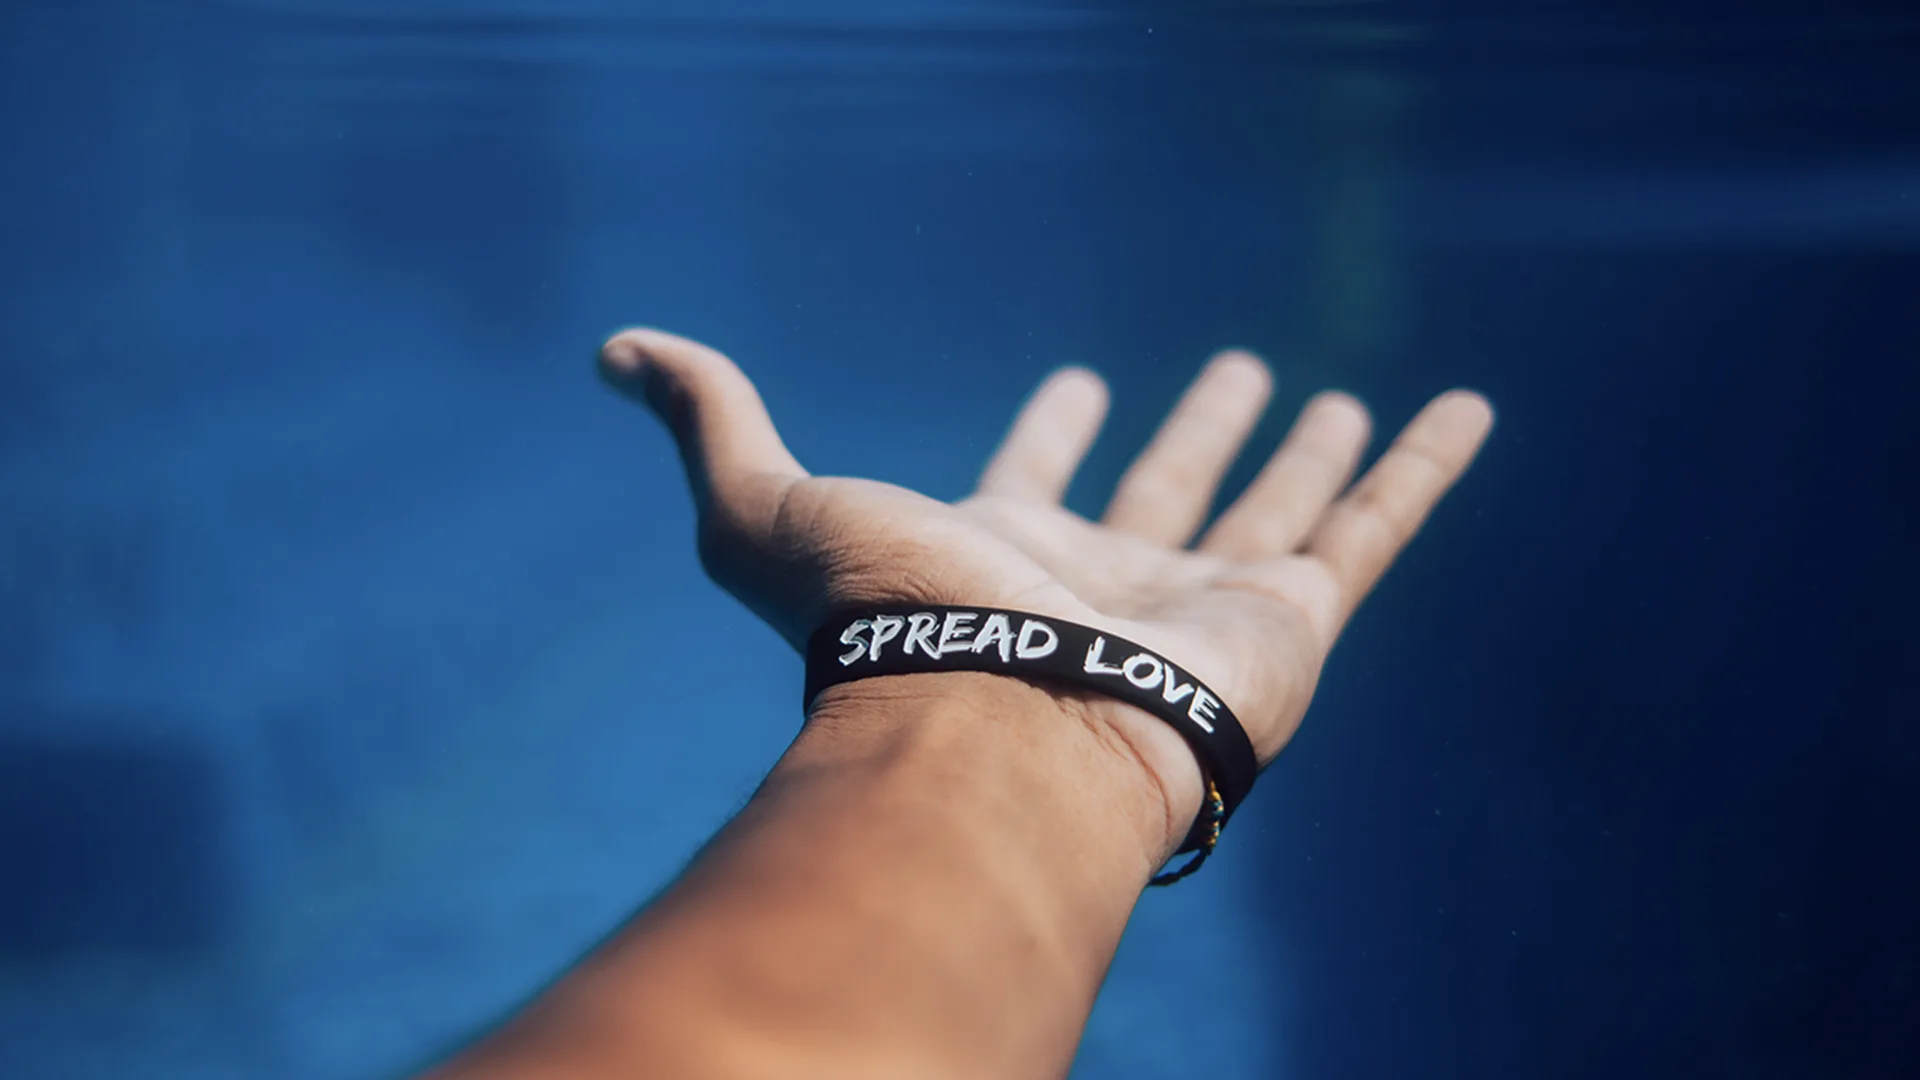 A hand with a bracelet that says Spread Love